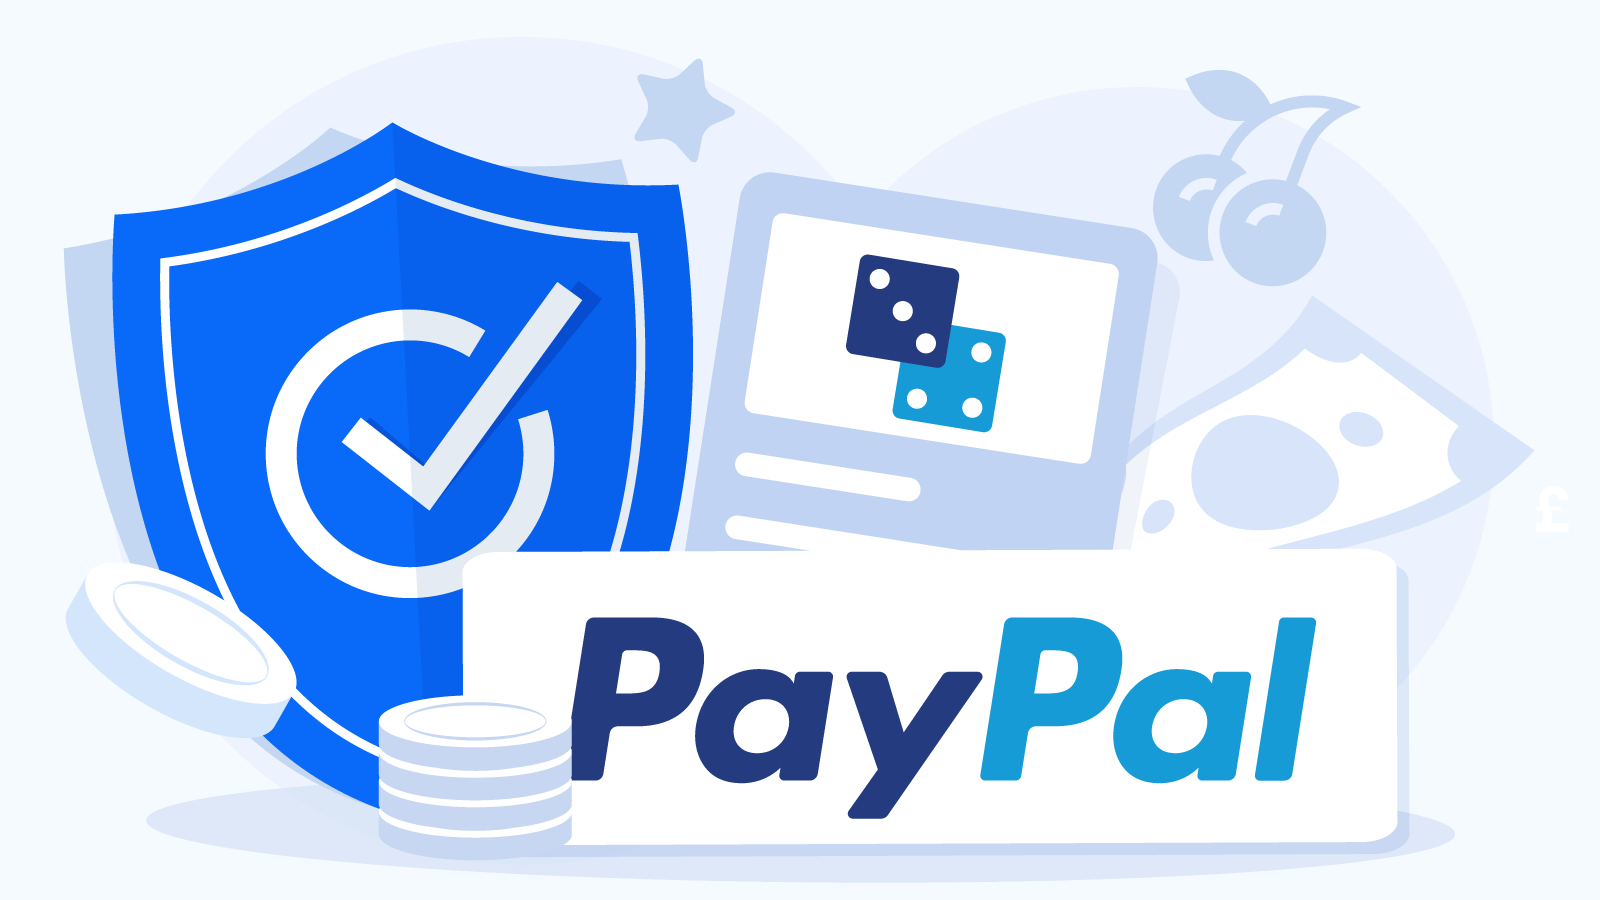 Key Certifications That Validate PayPal Trust and Safety